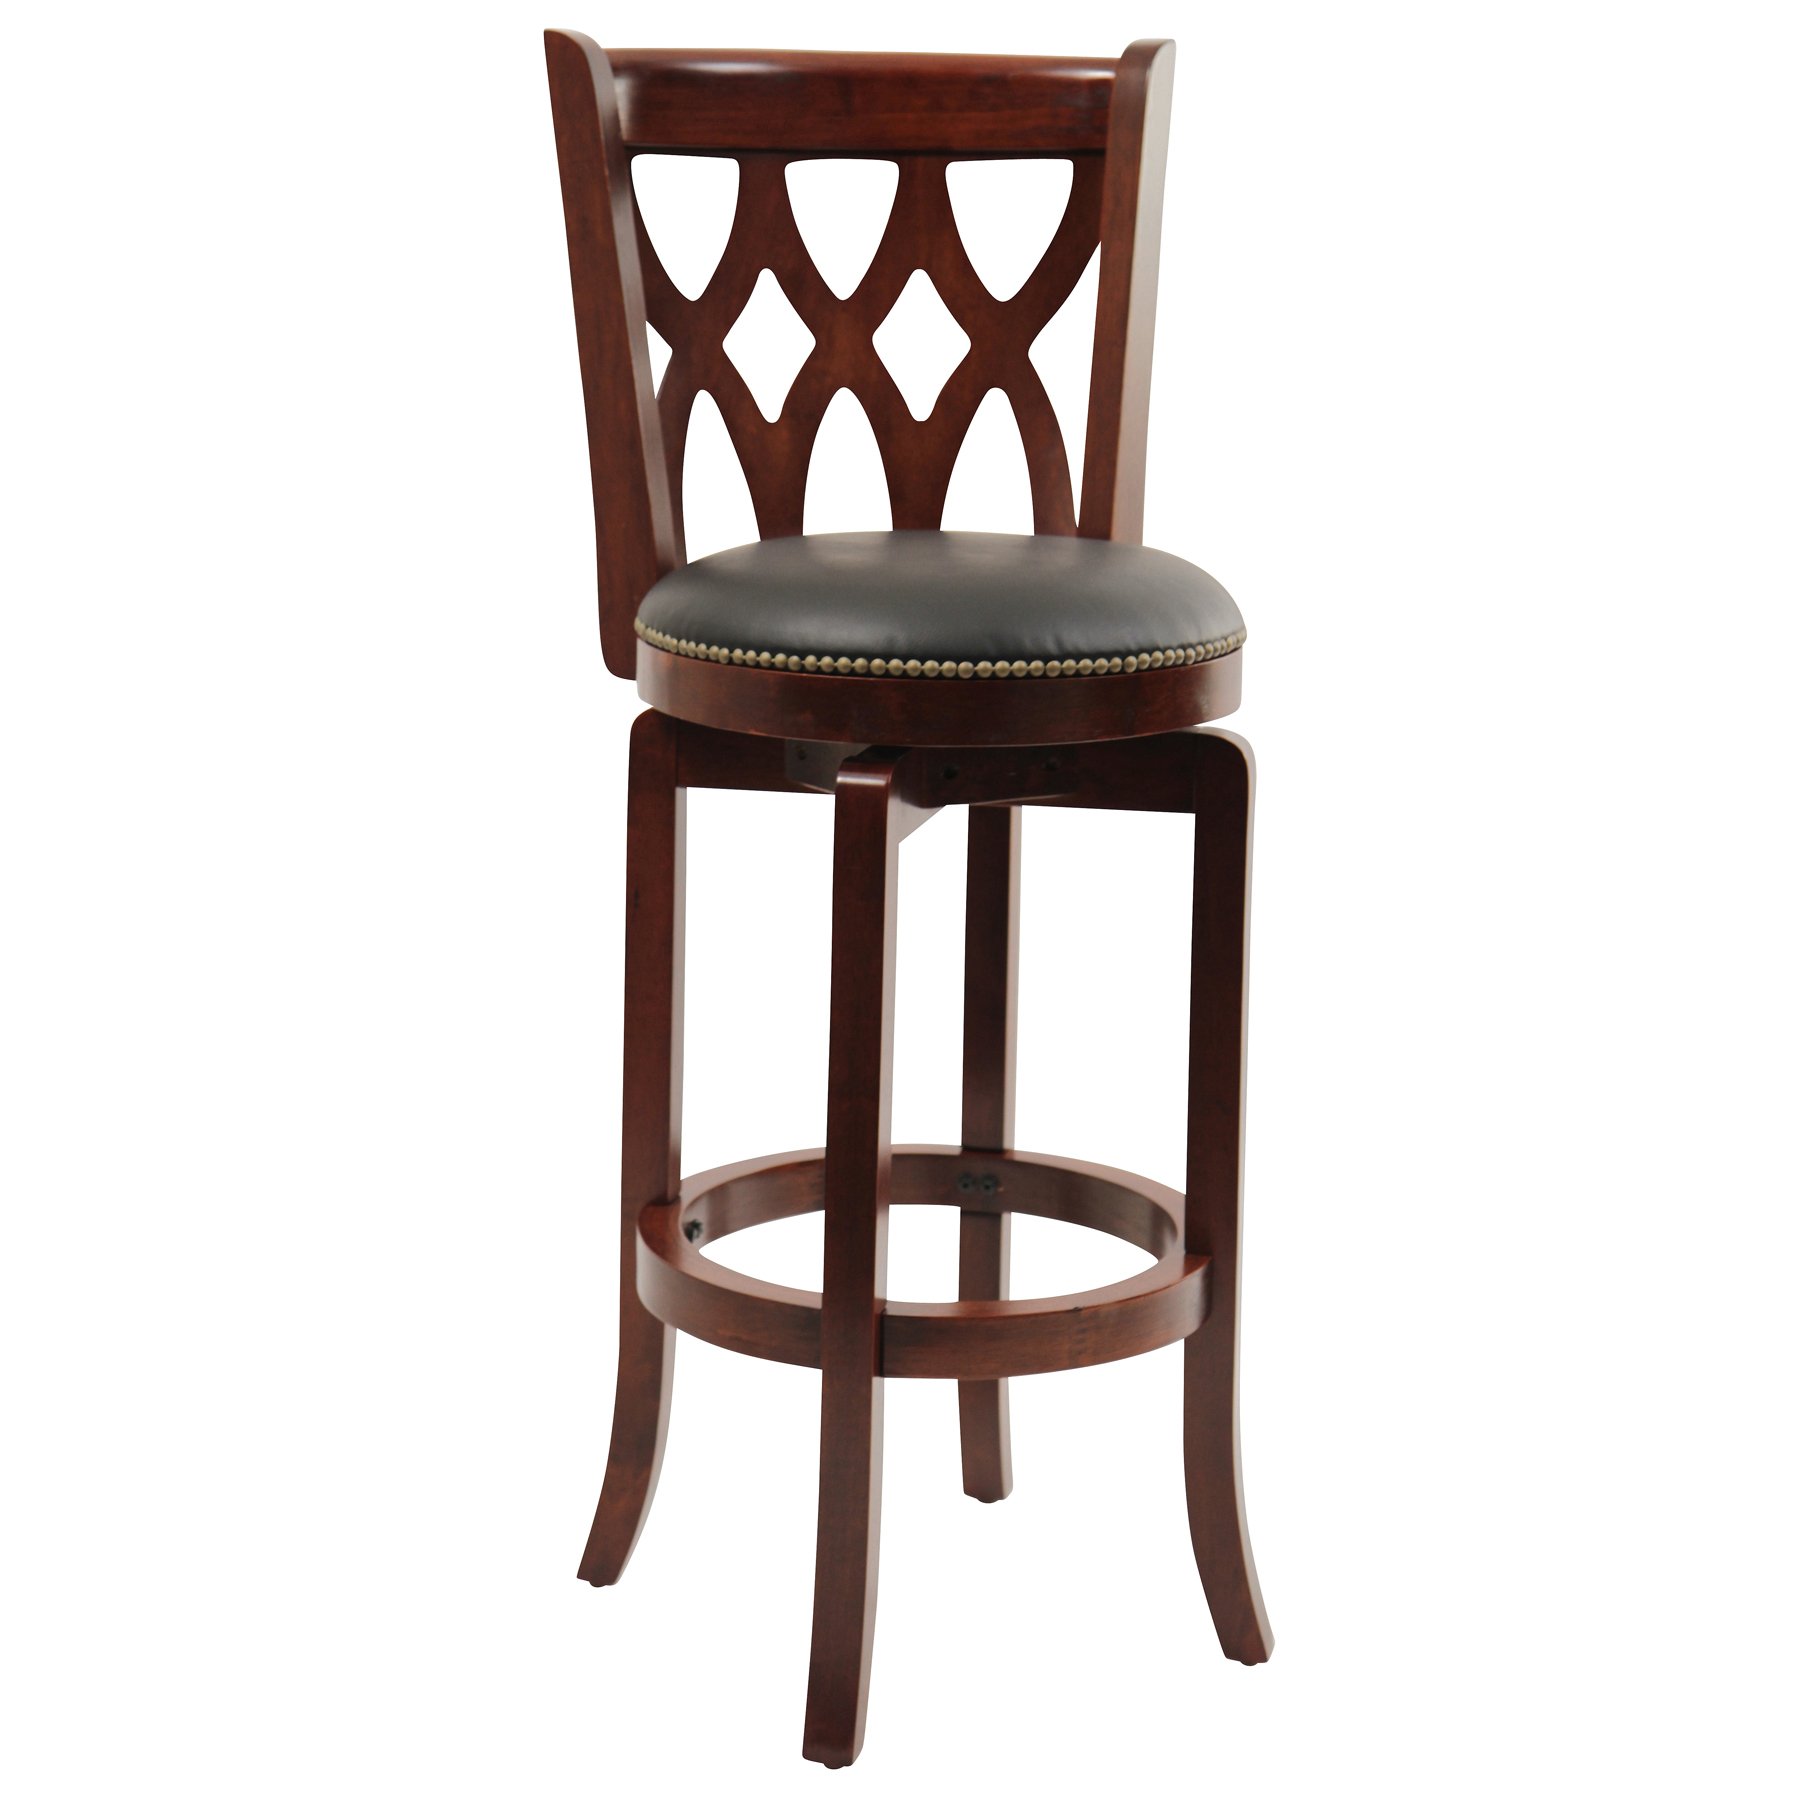 Boraam Cathedral Bar Height Swivel Stool, 29-Inch, Cherry, List Price is $140, Now Only $73.07, You Save $66.93